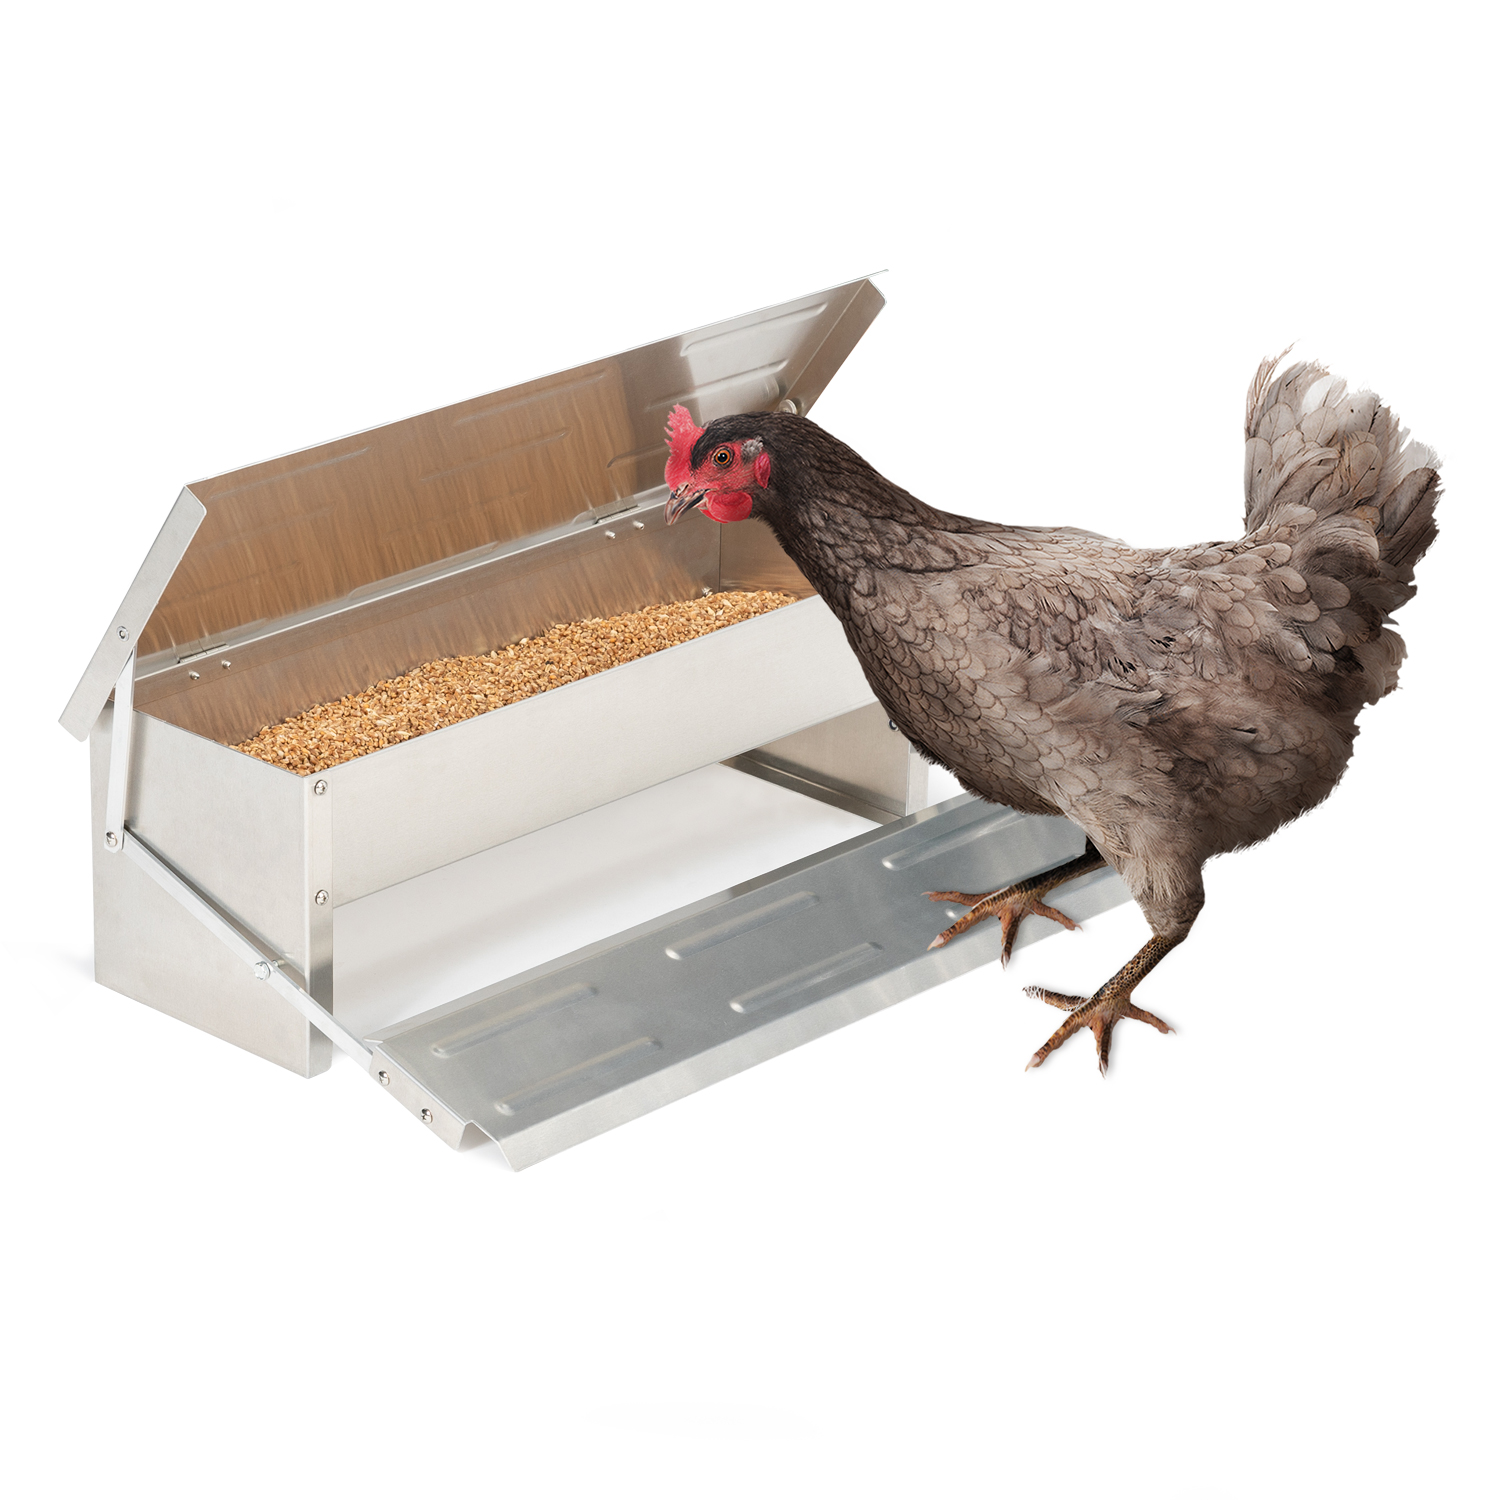 Mangeoire poule Snack Roller recyclée - Chemin des Poulaillers